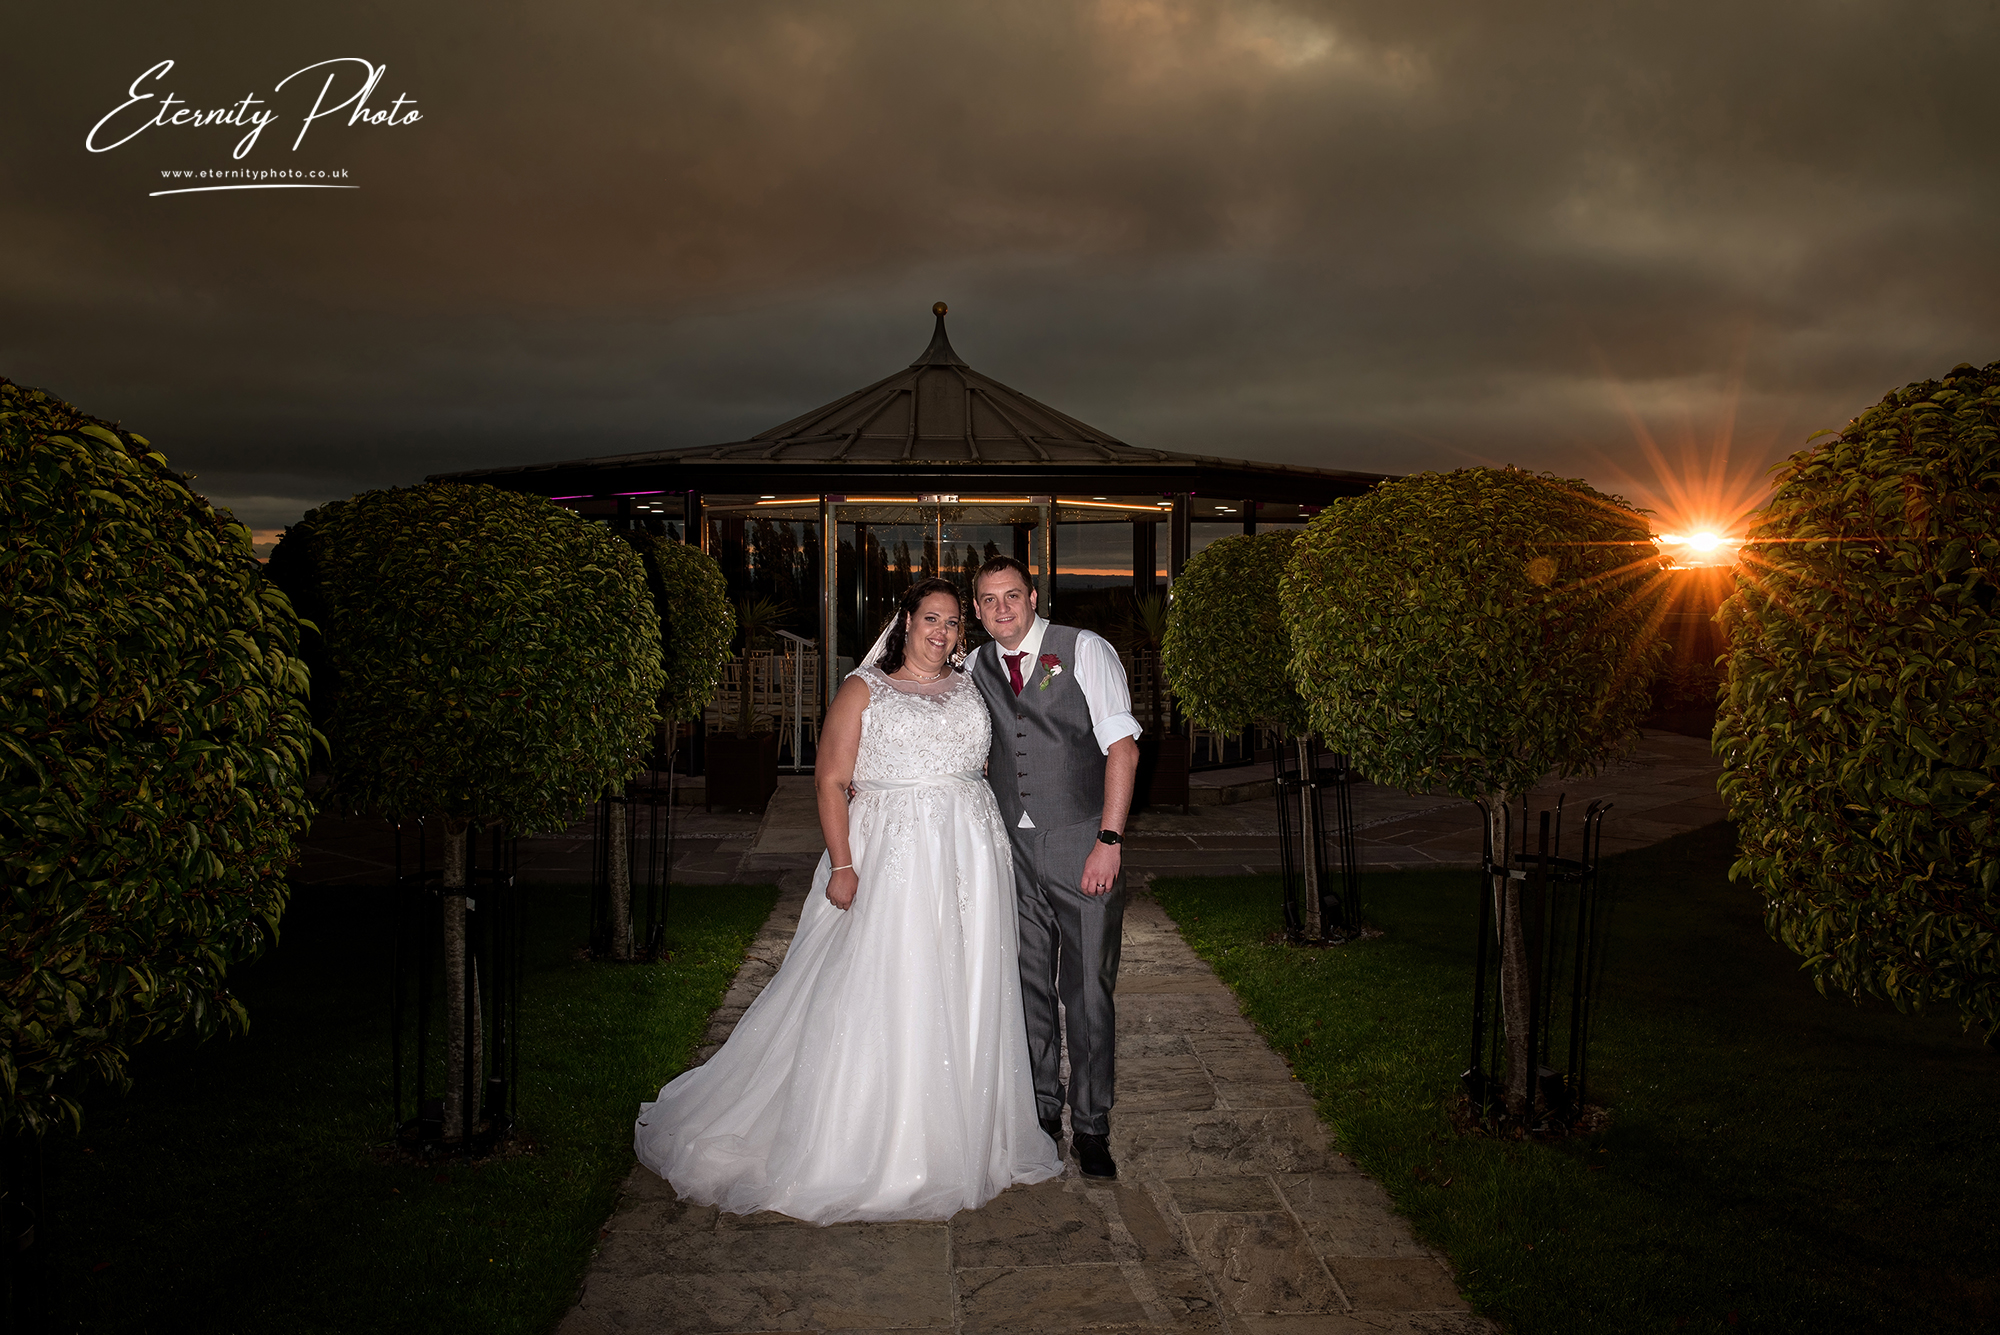 Bride and groom posing at sunset outside wedding venue.